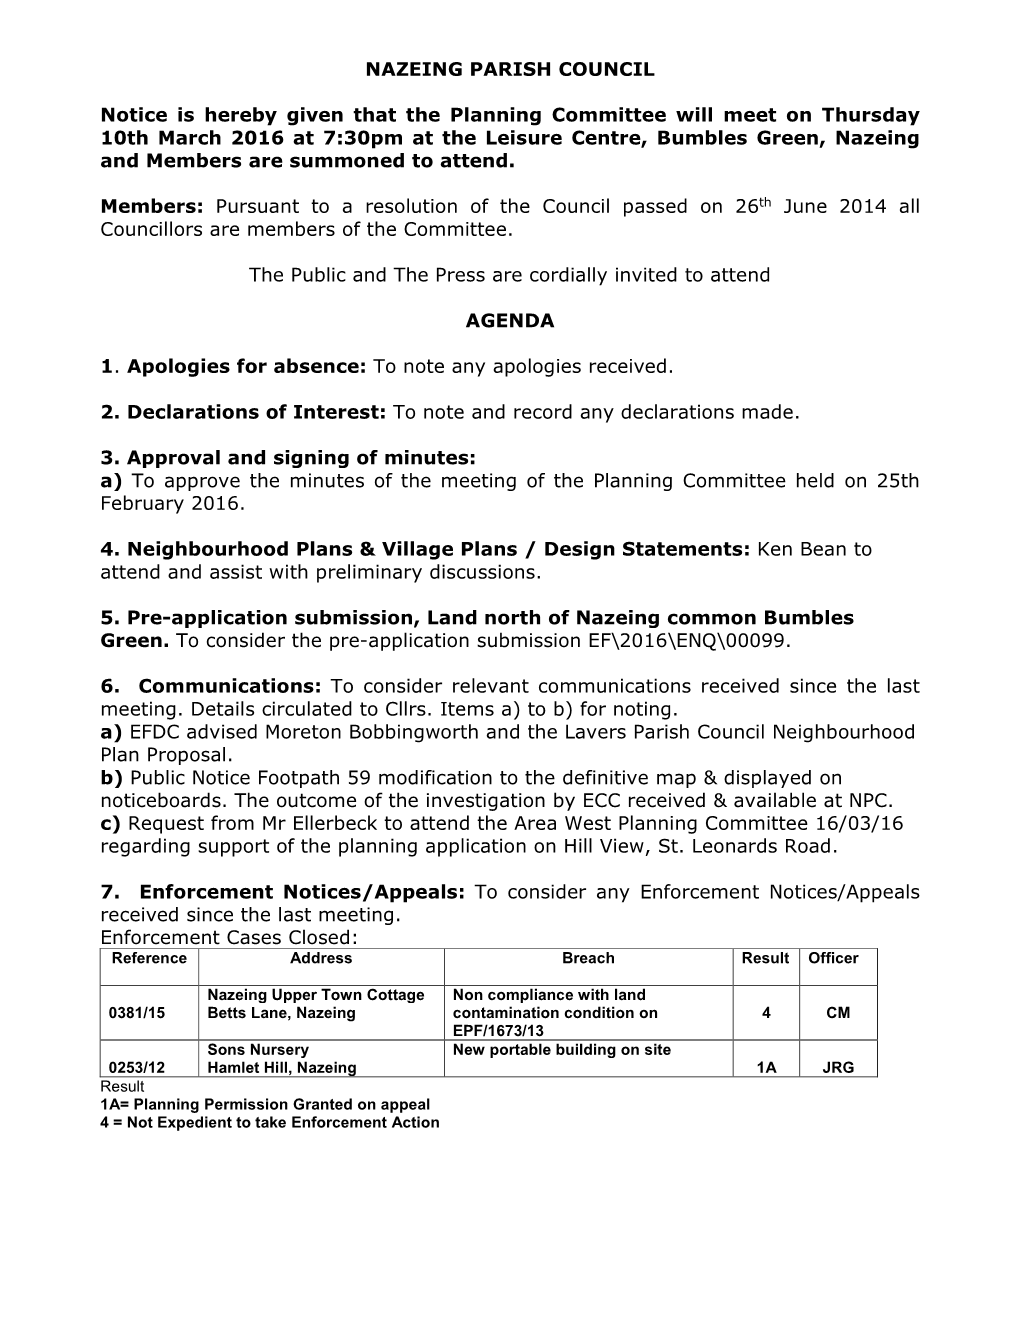 NAZEING PARISH COUNCIL Notice Is Hereby Given That the Planning